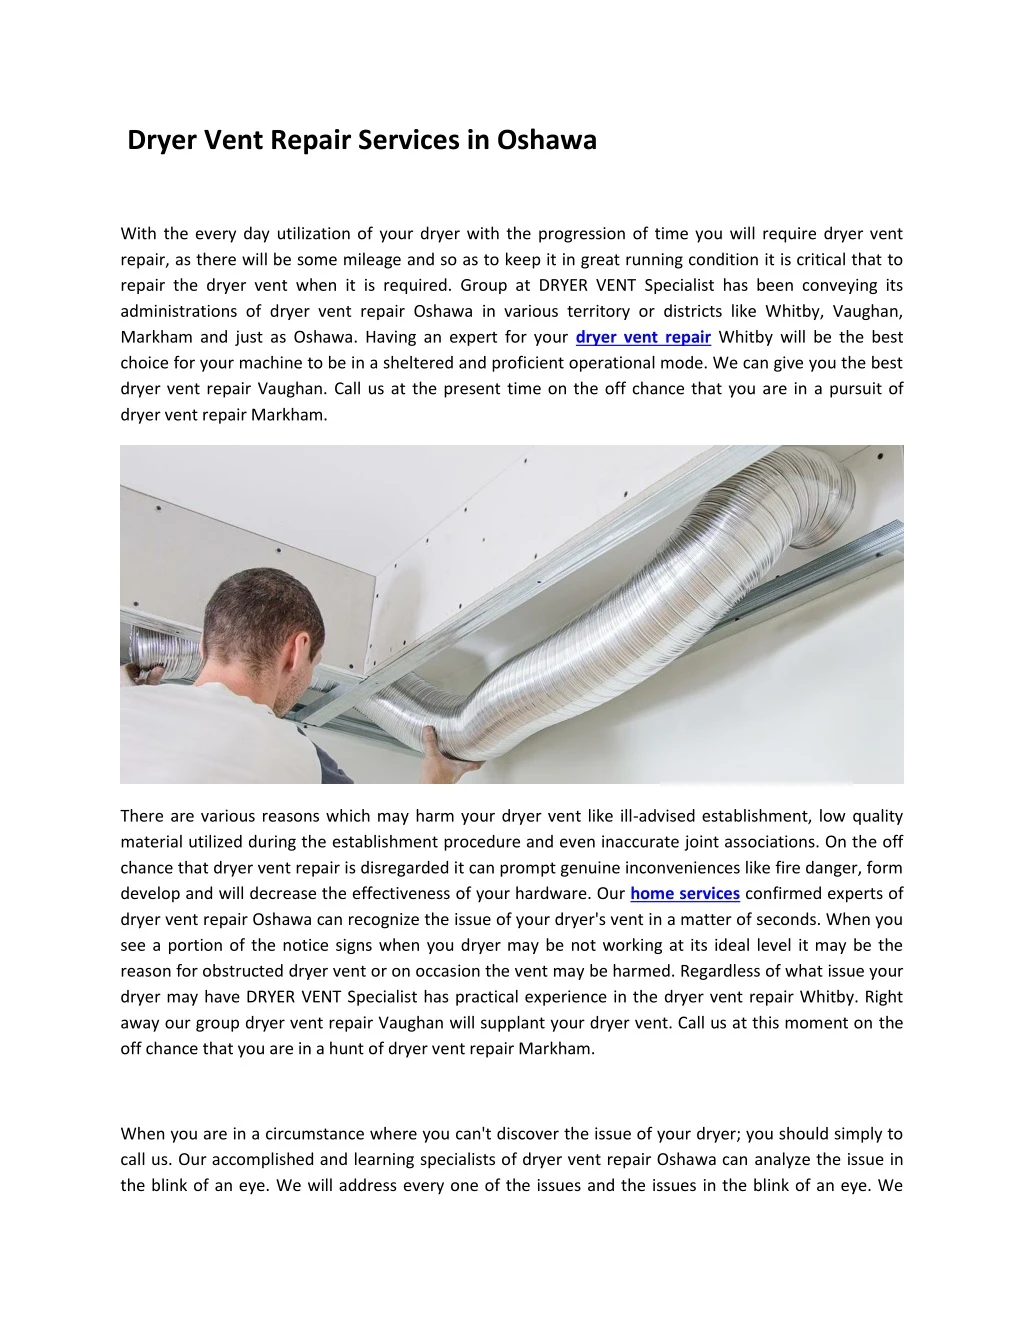 dryer vent repair services in oshawa